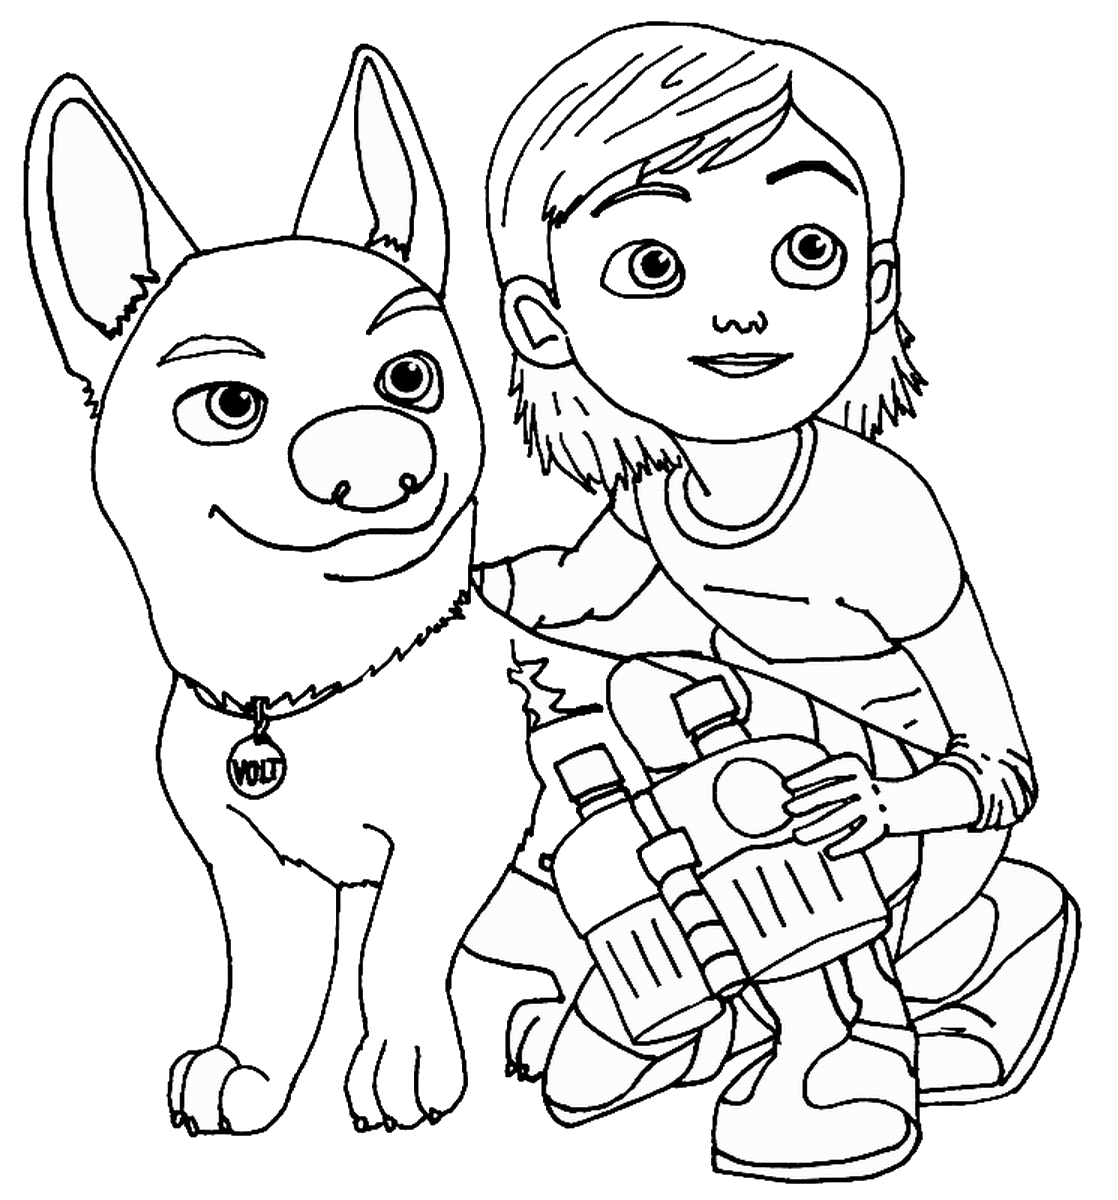 bolt smiling coloring page Bolt coloring pages printable